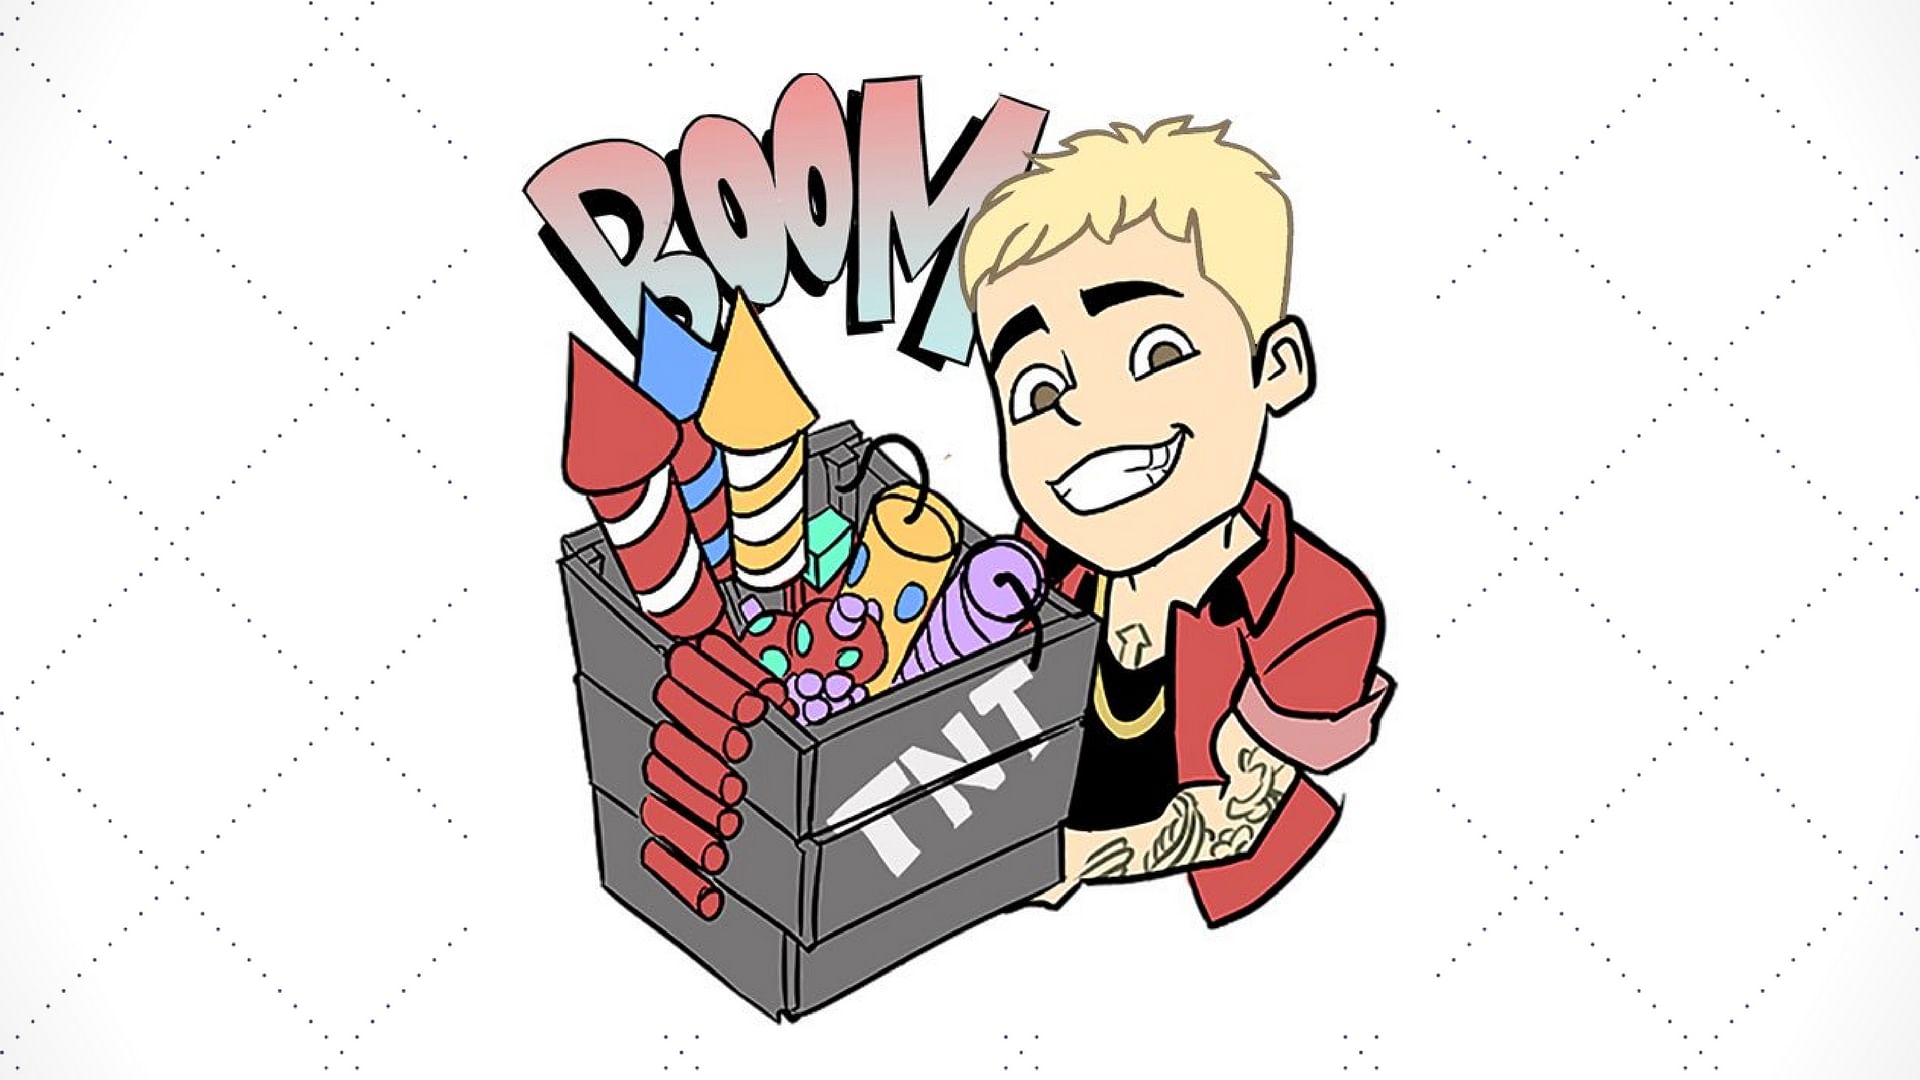 Justin Bieber is coming to town. (Photo Courtesy: <a href="https://twitter.com/justinbieber/media">twitter.com</a>/justinbieber)